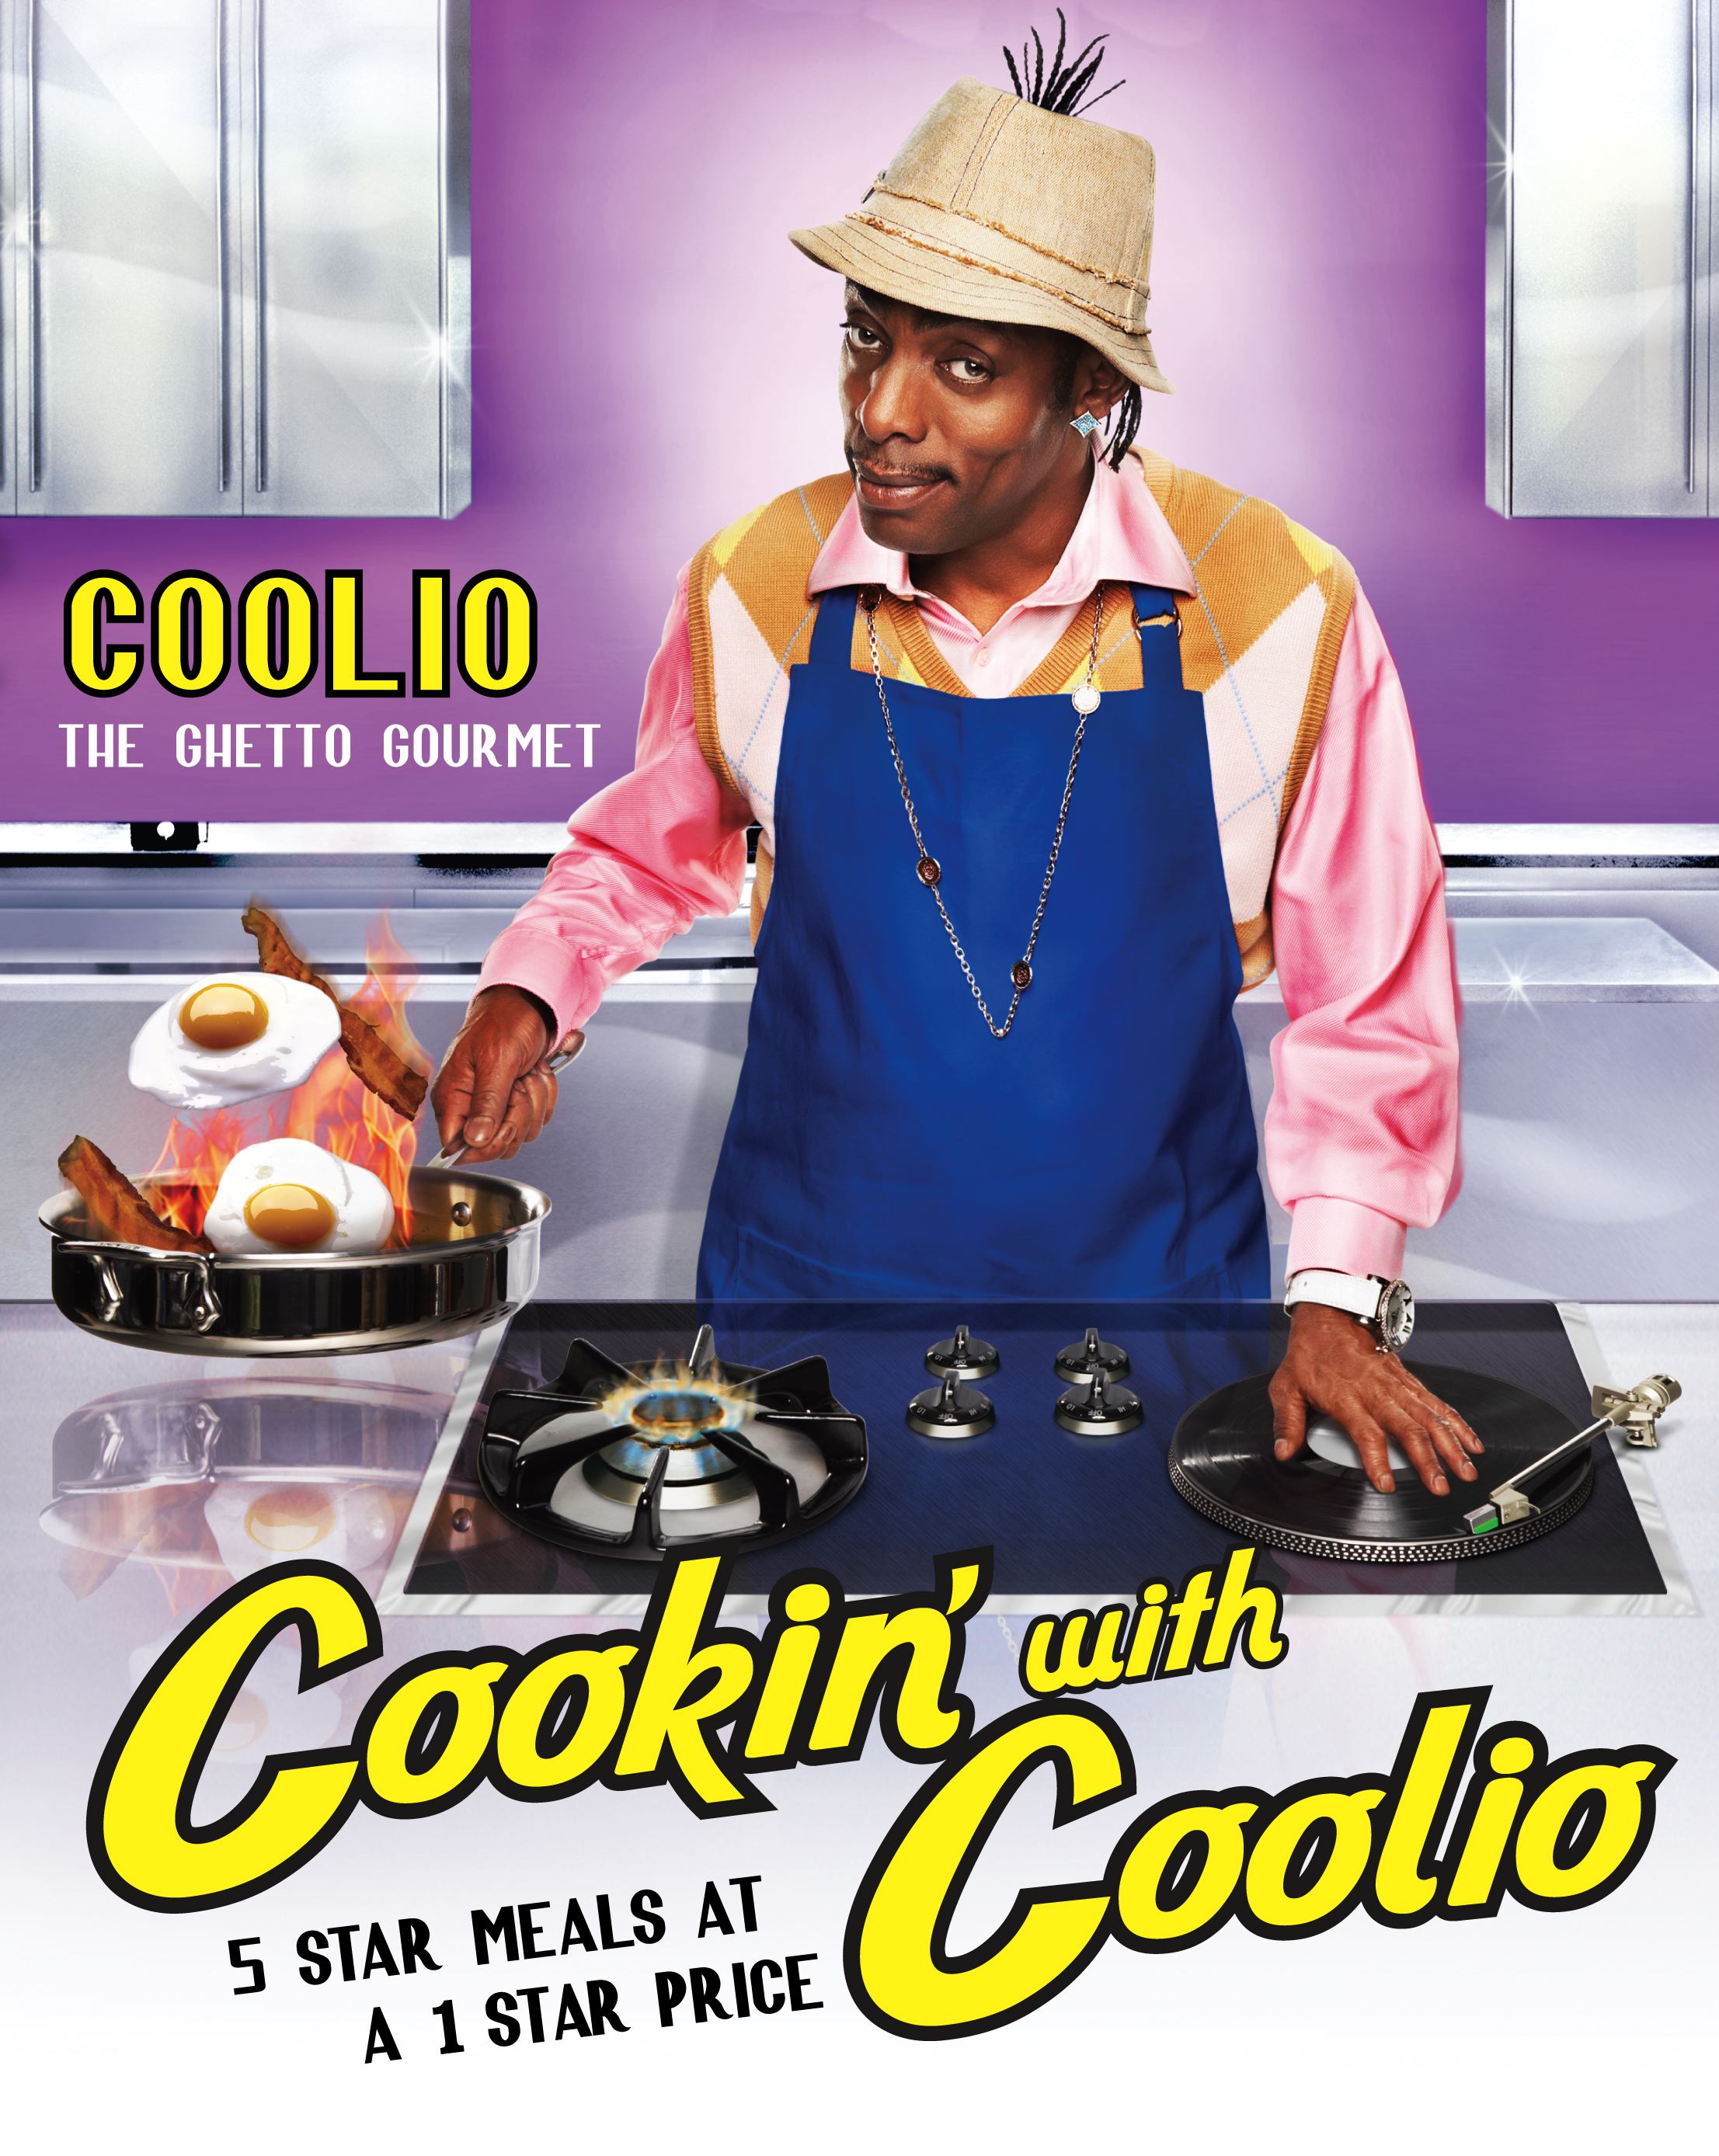 Cookin' with Coolio : 5 Star Meals at a 1 Star Price (Paperback) - image 1 of 1